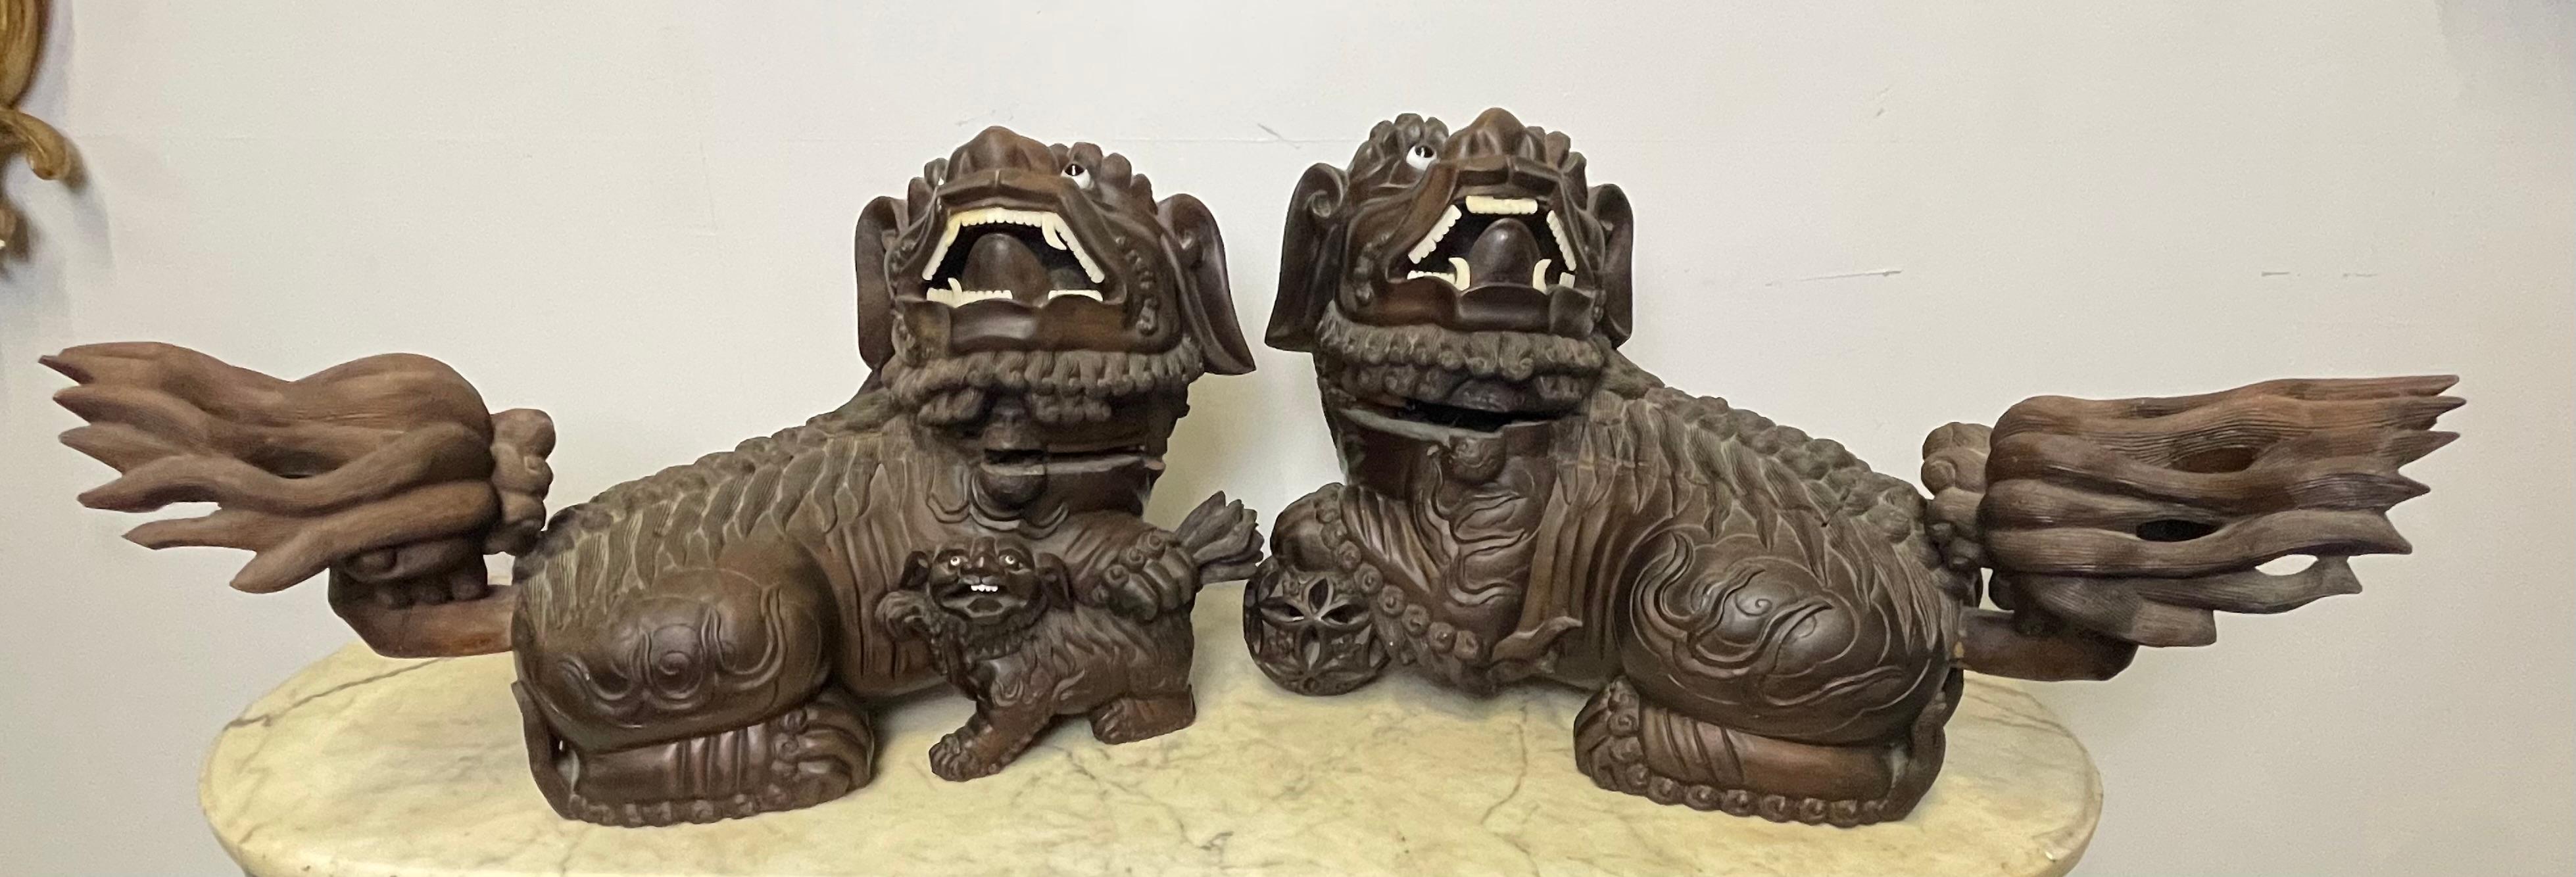 Pair of 18th/19th Century Solid Teak Foo Dogs, Opposing, Statuary For Sale 8